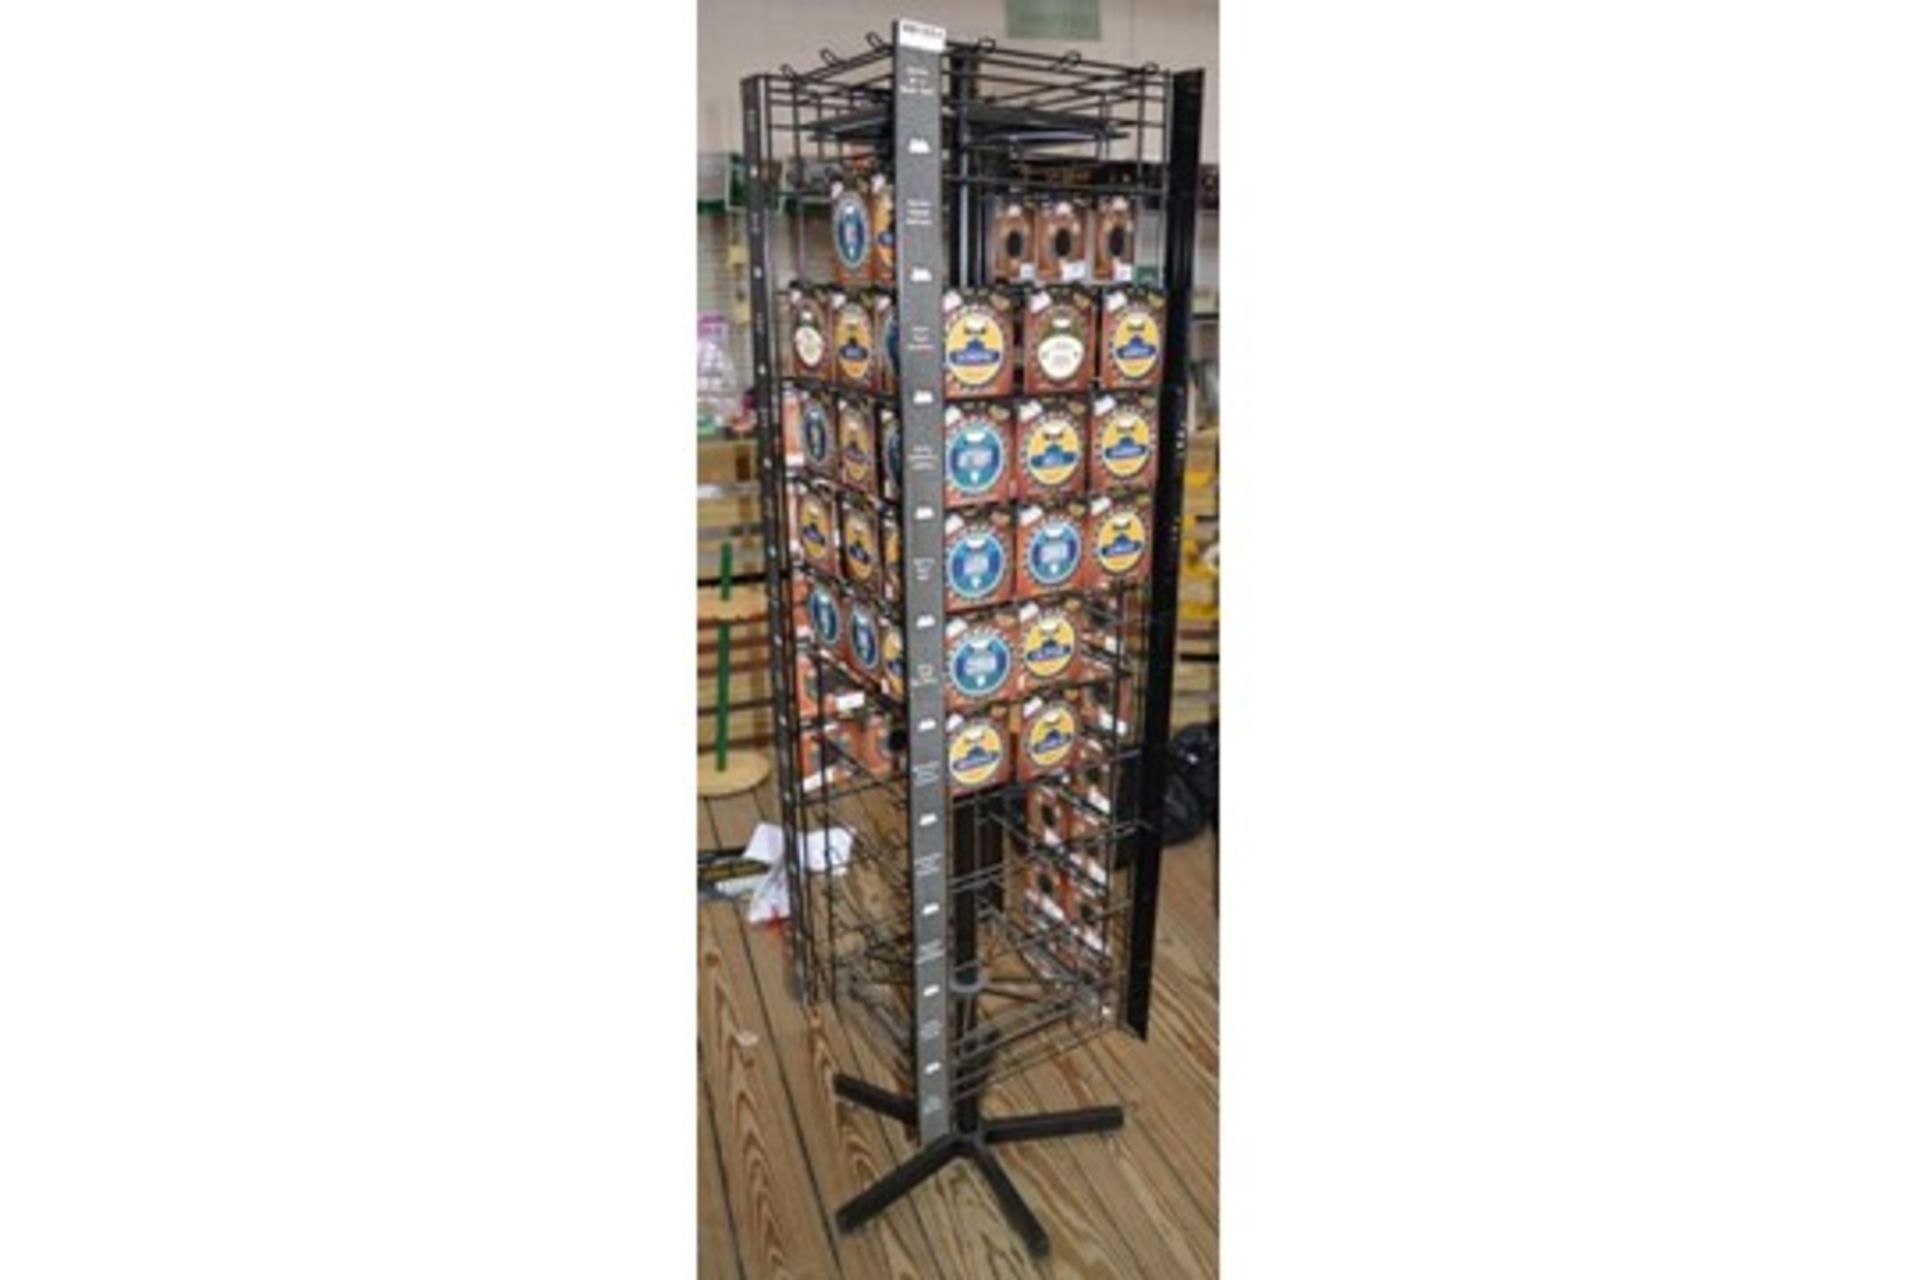 27 x Retail Carousel Display Stands With Approximately 2,800 Items of Resale Stock - Includes - Image 32 of 61